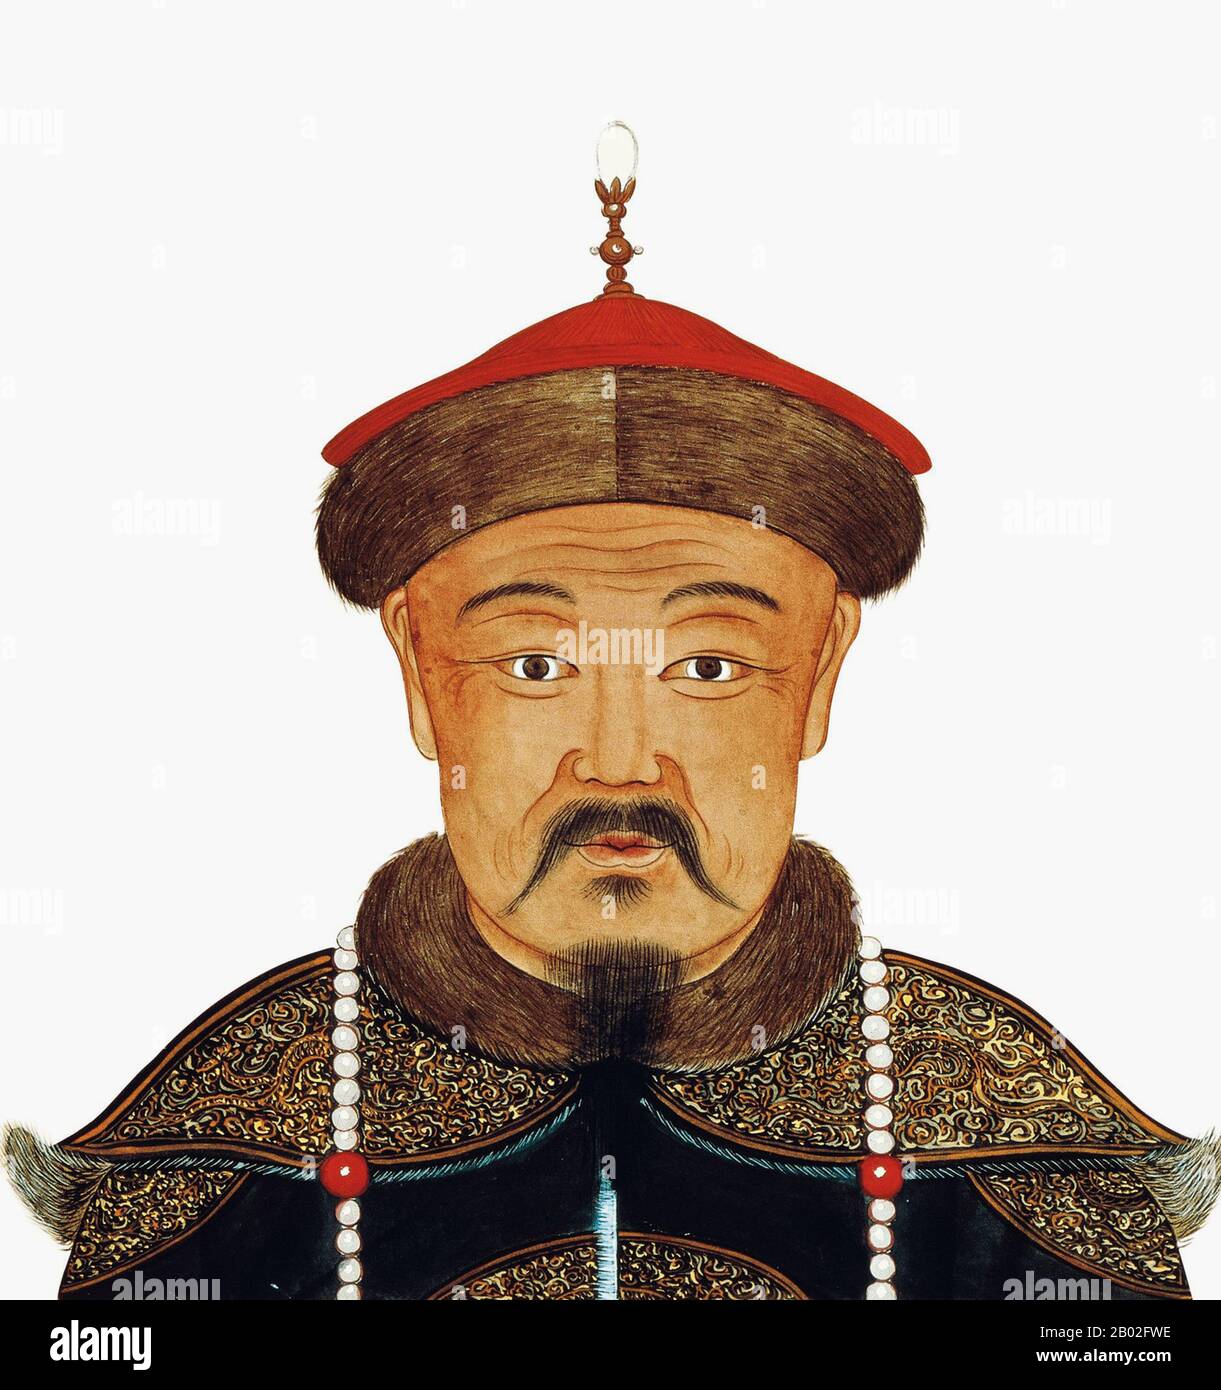 Kublai (or Khubilai) Khan (pinyin: Hūbìliè, (September 23, 1215 – February 18, 1294) was the fifth Great Khan of the Mongol Empire from 1260 to 1294 and the founder of the Yuan Dynasty in East Asia. As the second son of Tolui and Sorghaghtani Beki and a grandson of Genghis Khan, he claimed the title of Khagan of the Ikh Mongol Uls (Mongol Empire).  In 1271, Kublai established the Yuan Dynasty, which at that time ruled over present-day Mongolia, Tibet, Eastern Turkestan, North China, much of Western China, and some adjacent areas, and assumed the role of Emperor of China. By 1279, the Yuan forc Stock Photo